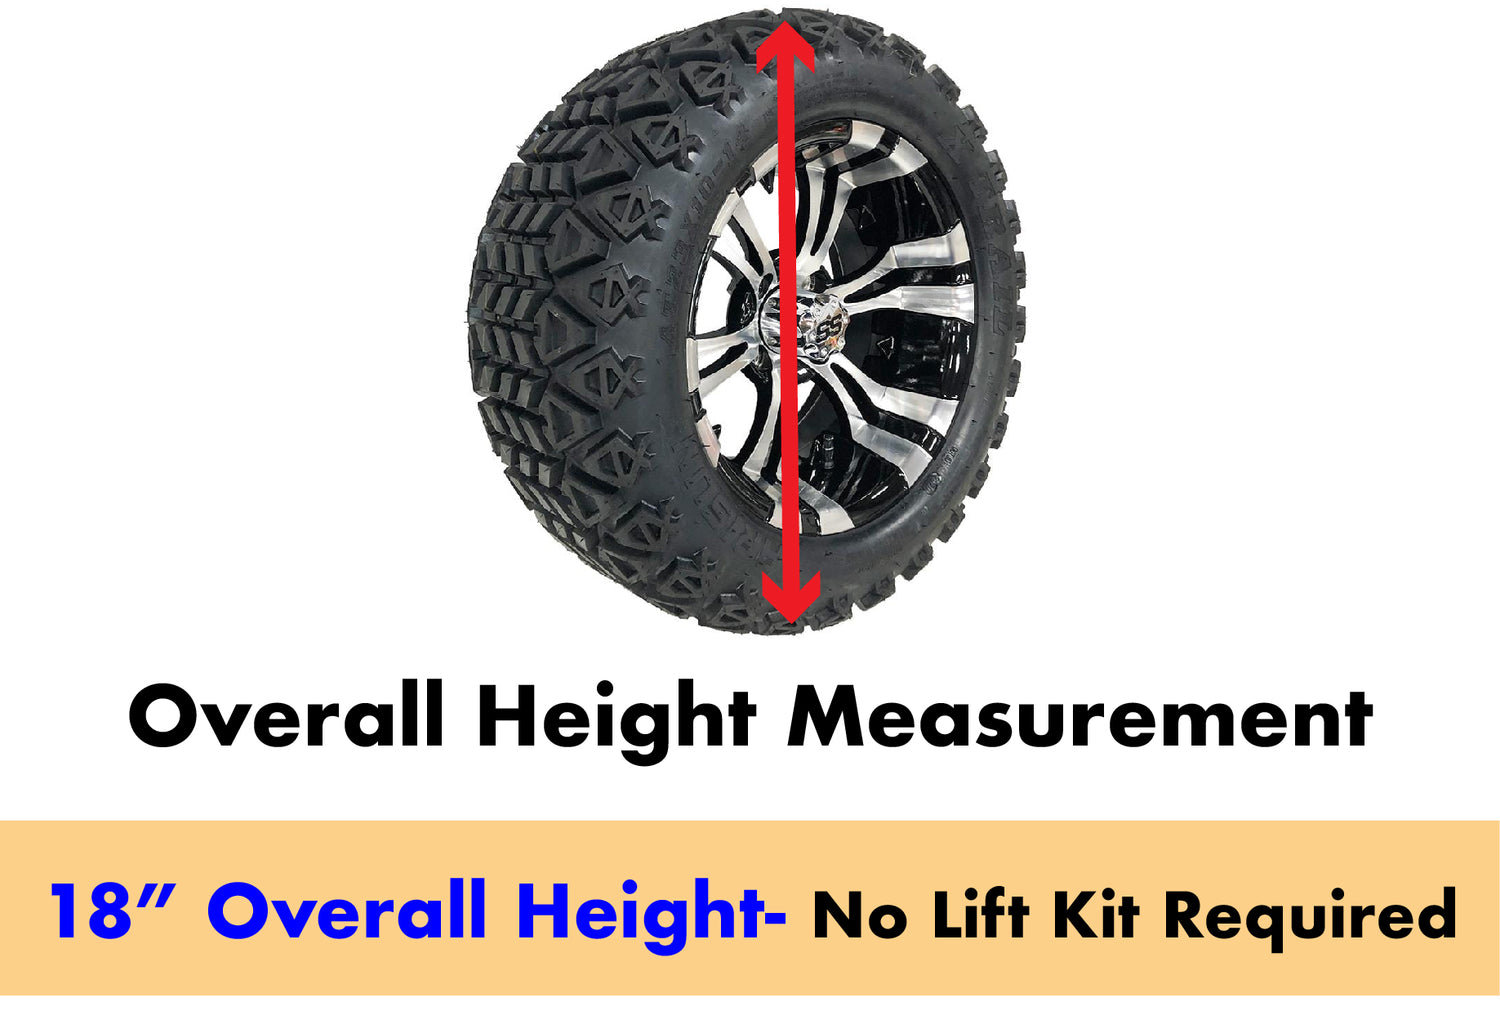 Non-Lifted Club Car Wheel and Tire Measurement Chart